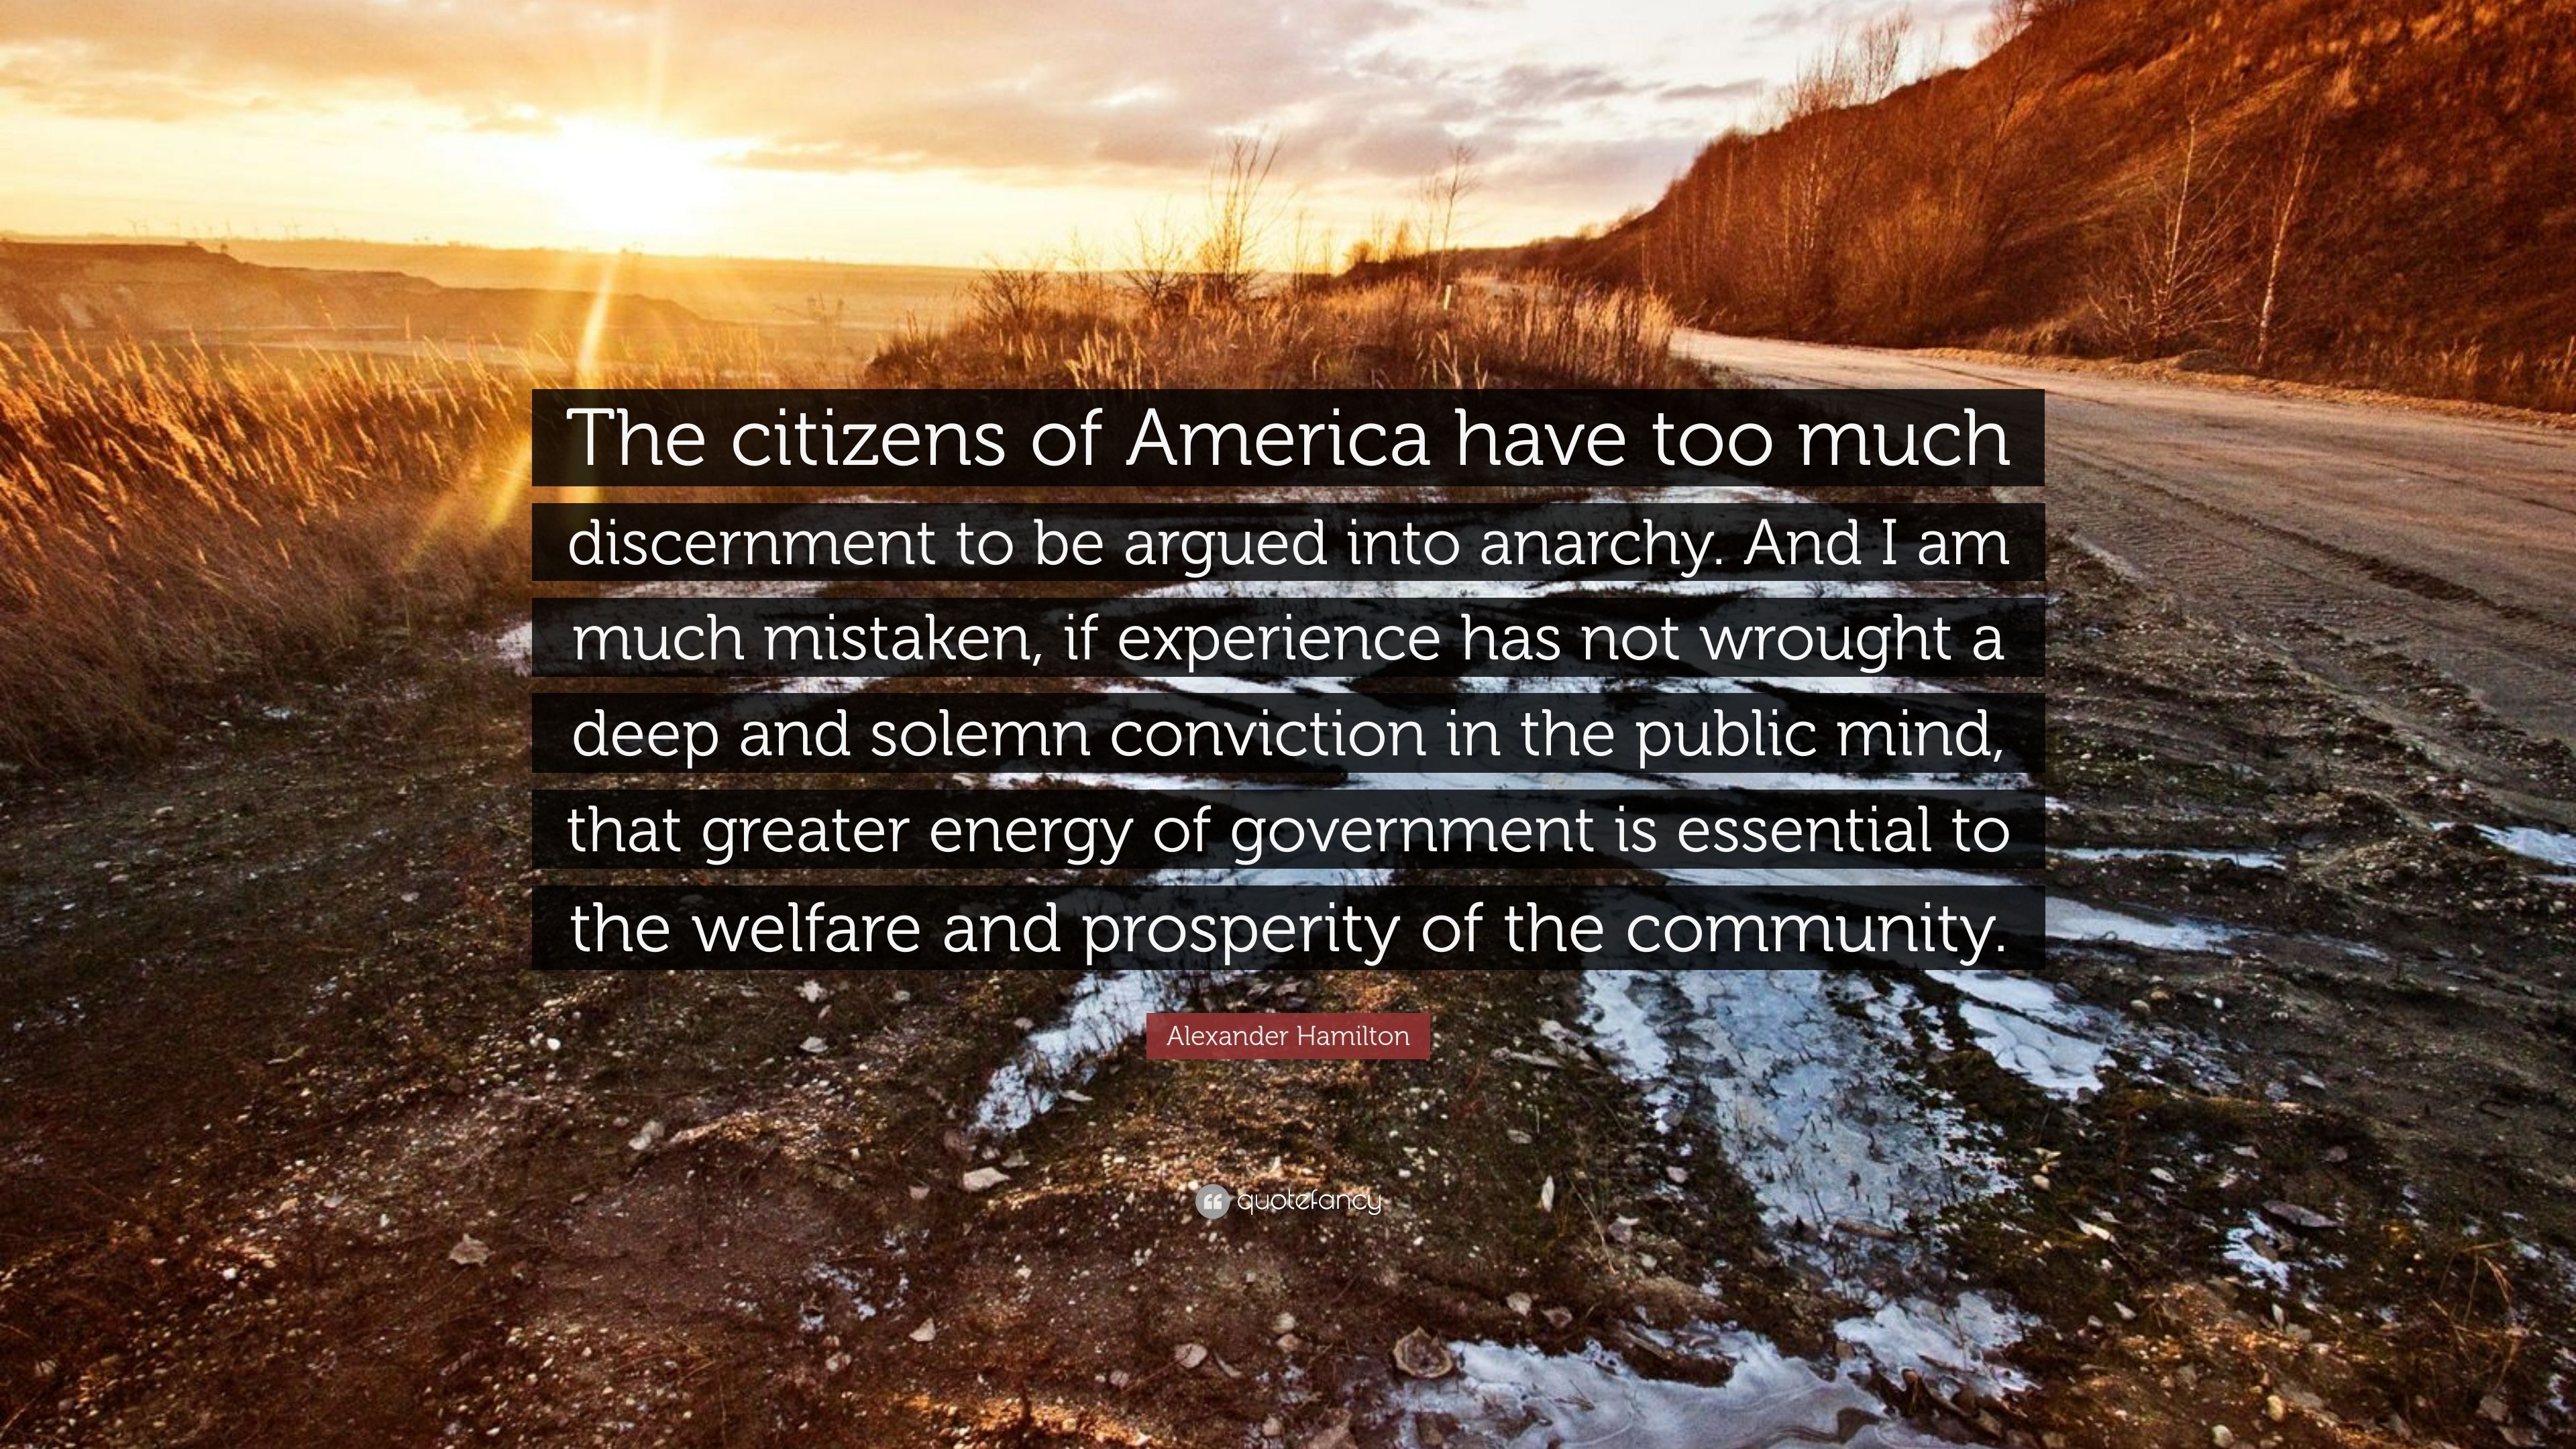 Alexander Hamilton Quote: “The citizens of America have too much